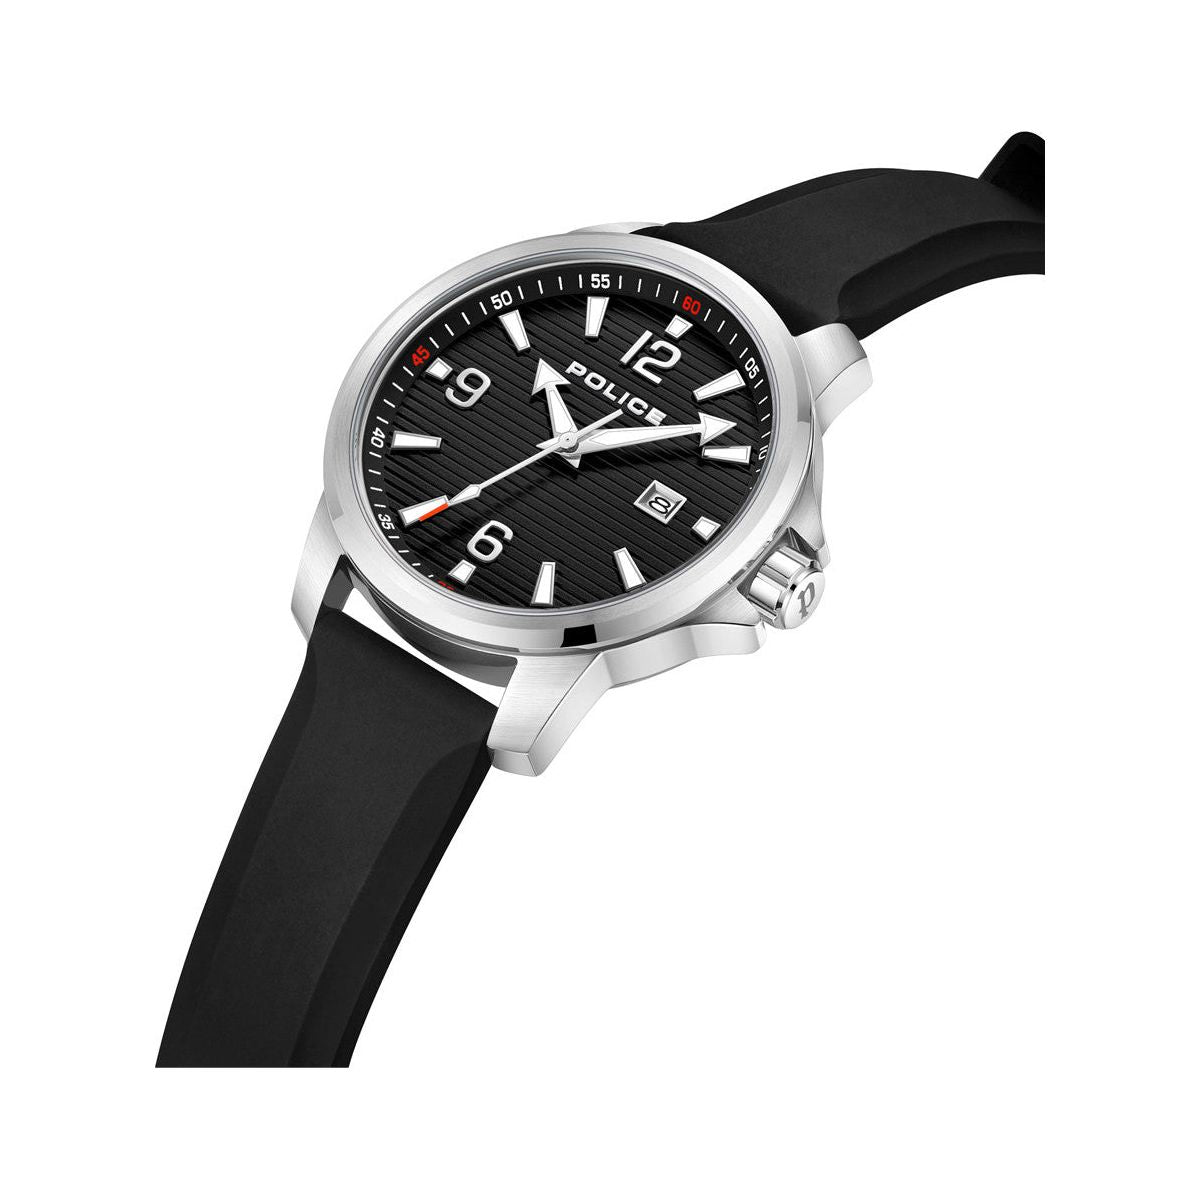 POLICE POLICE WATCHES Mod. PEWJN0020903 WATCHES police-watches-mod-pewjn0020903